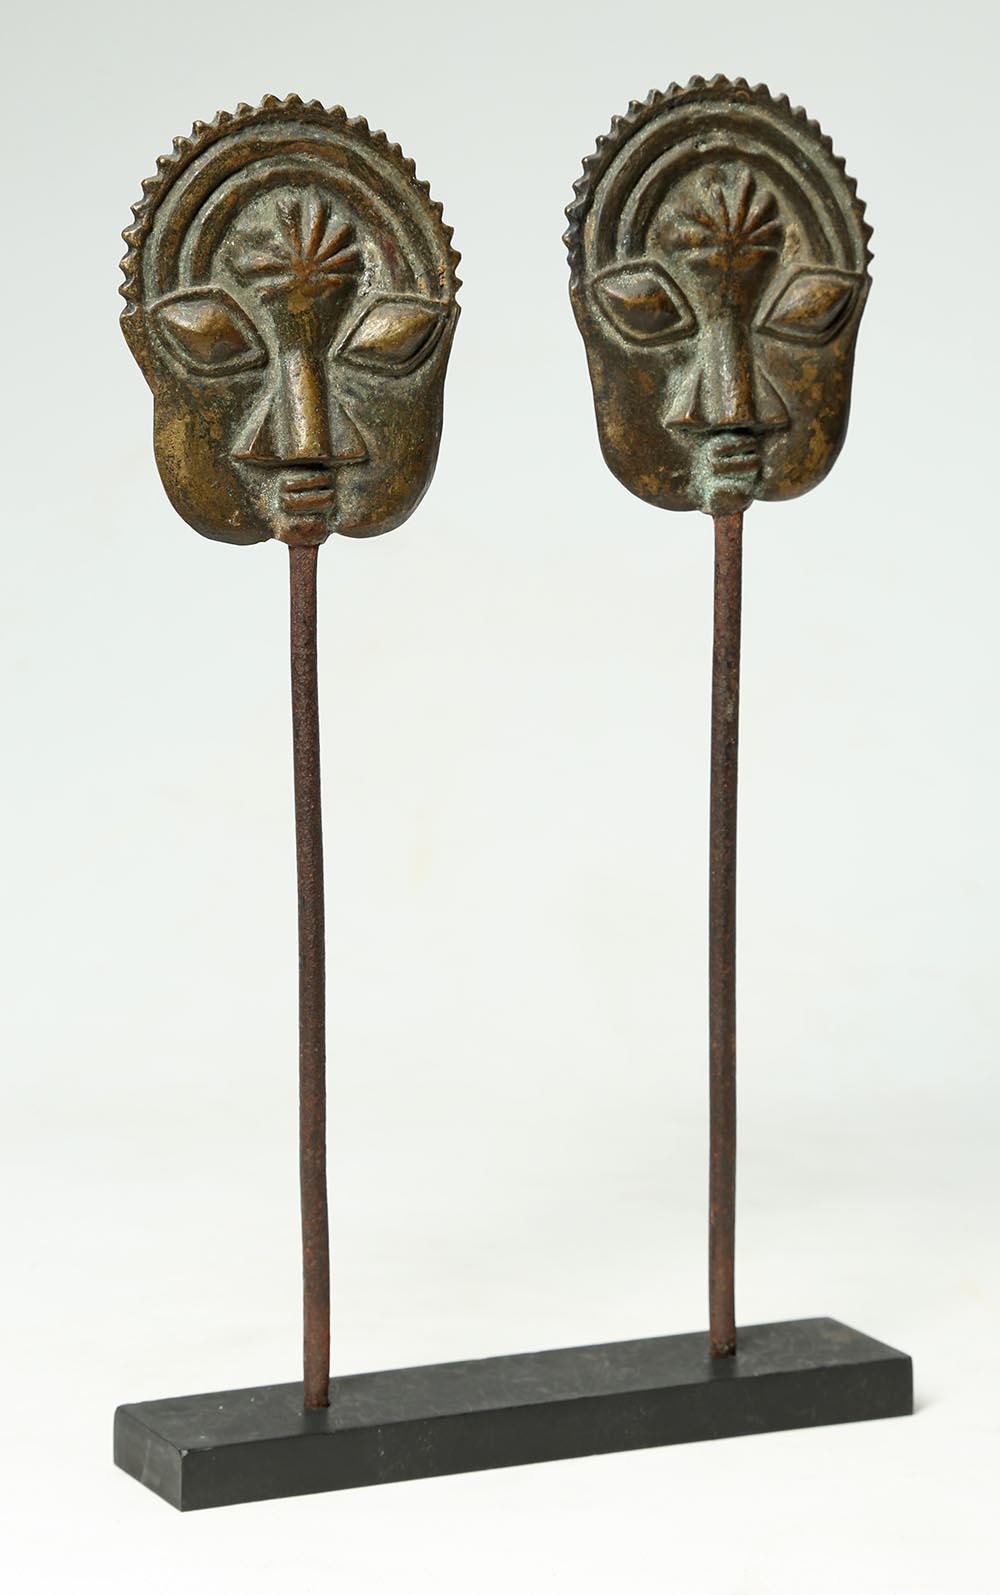 Hand-Crafted Yoruba Tribal Ogboni Pair of Brass Pins with Faces, Nigeria, Early 20th Century